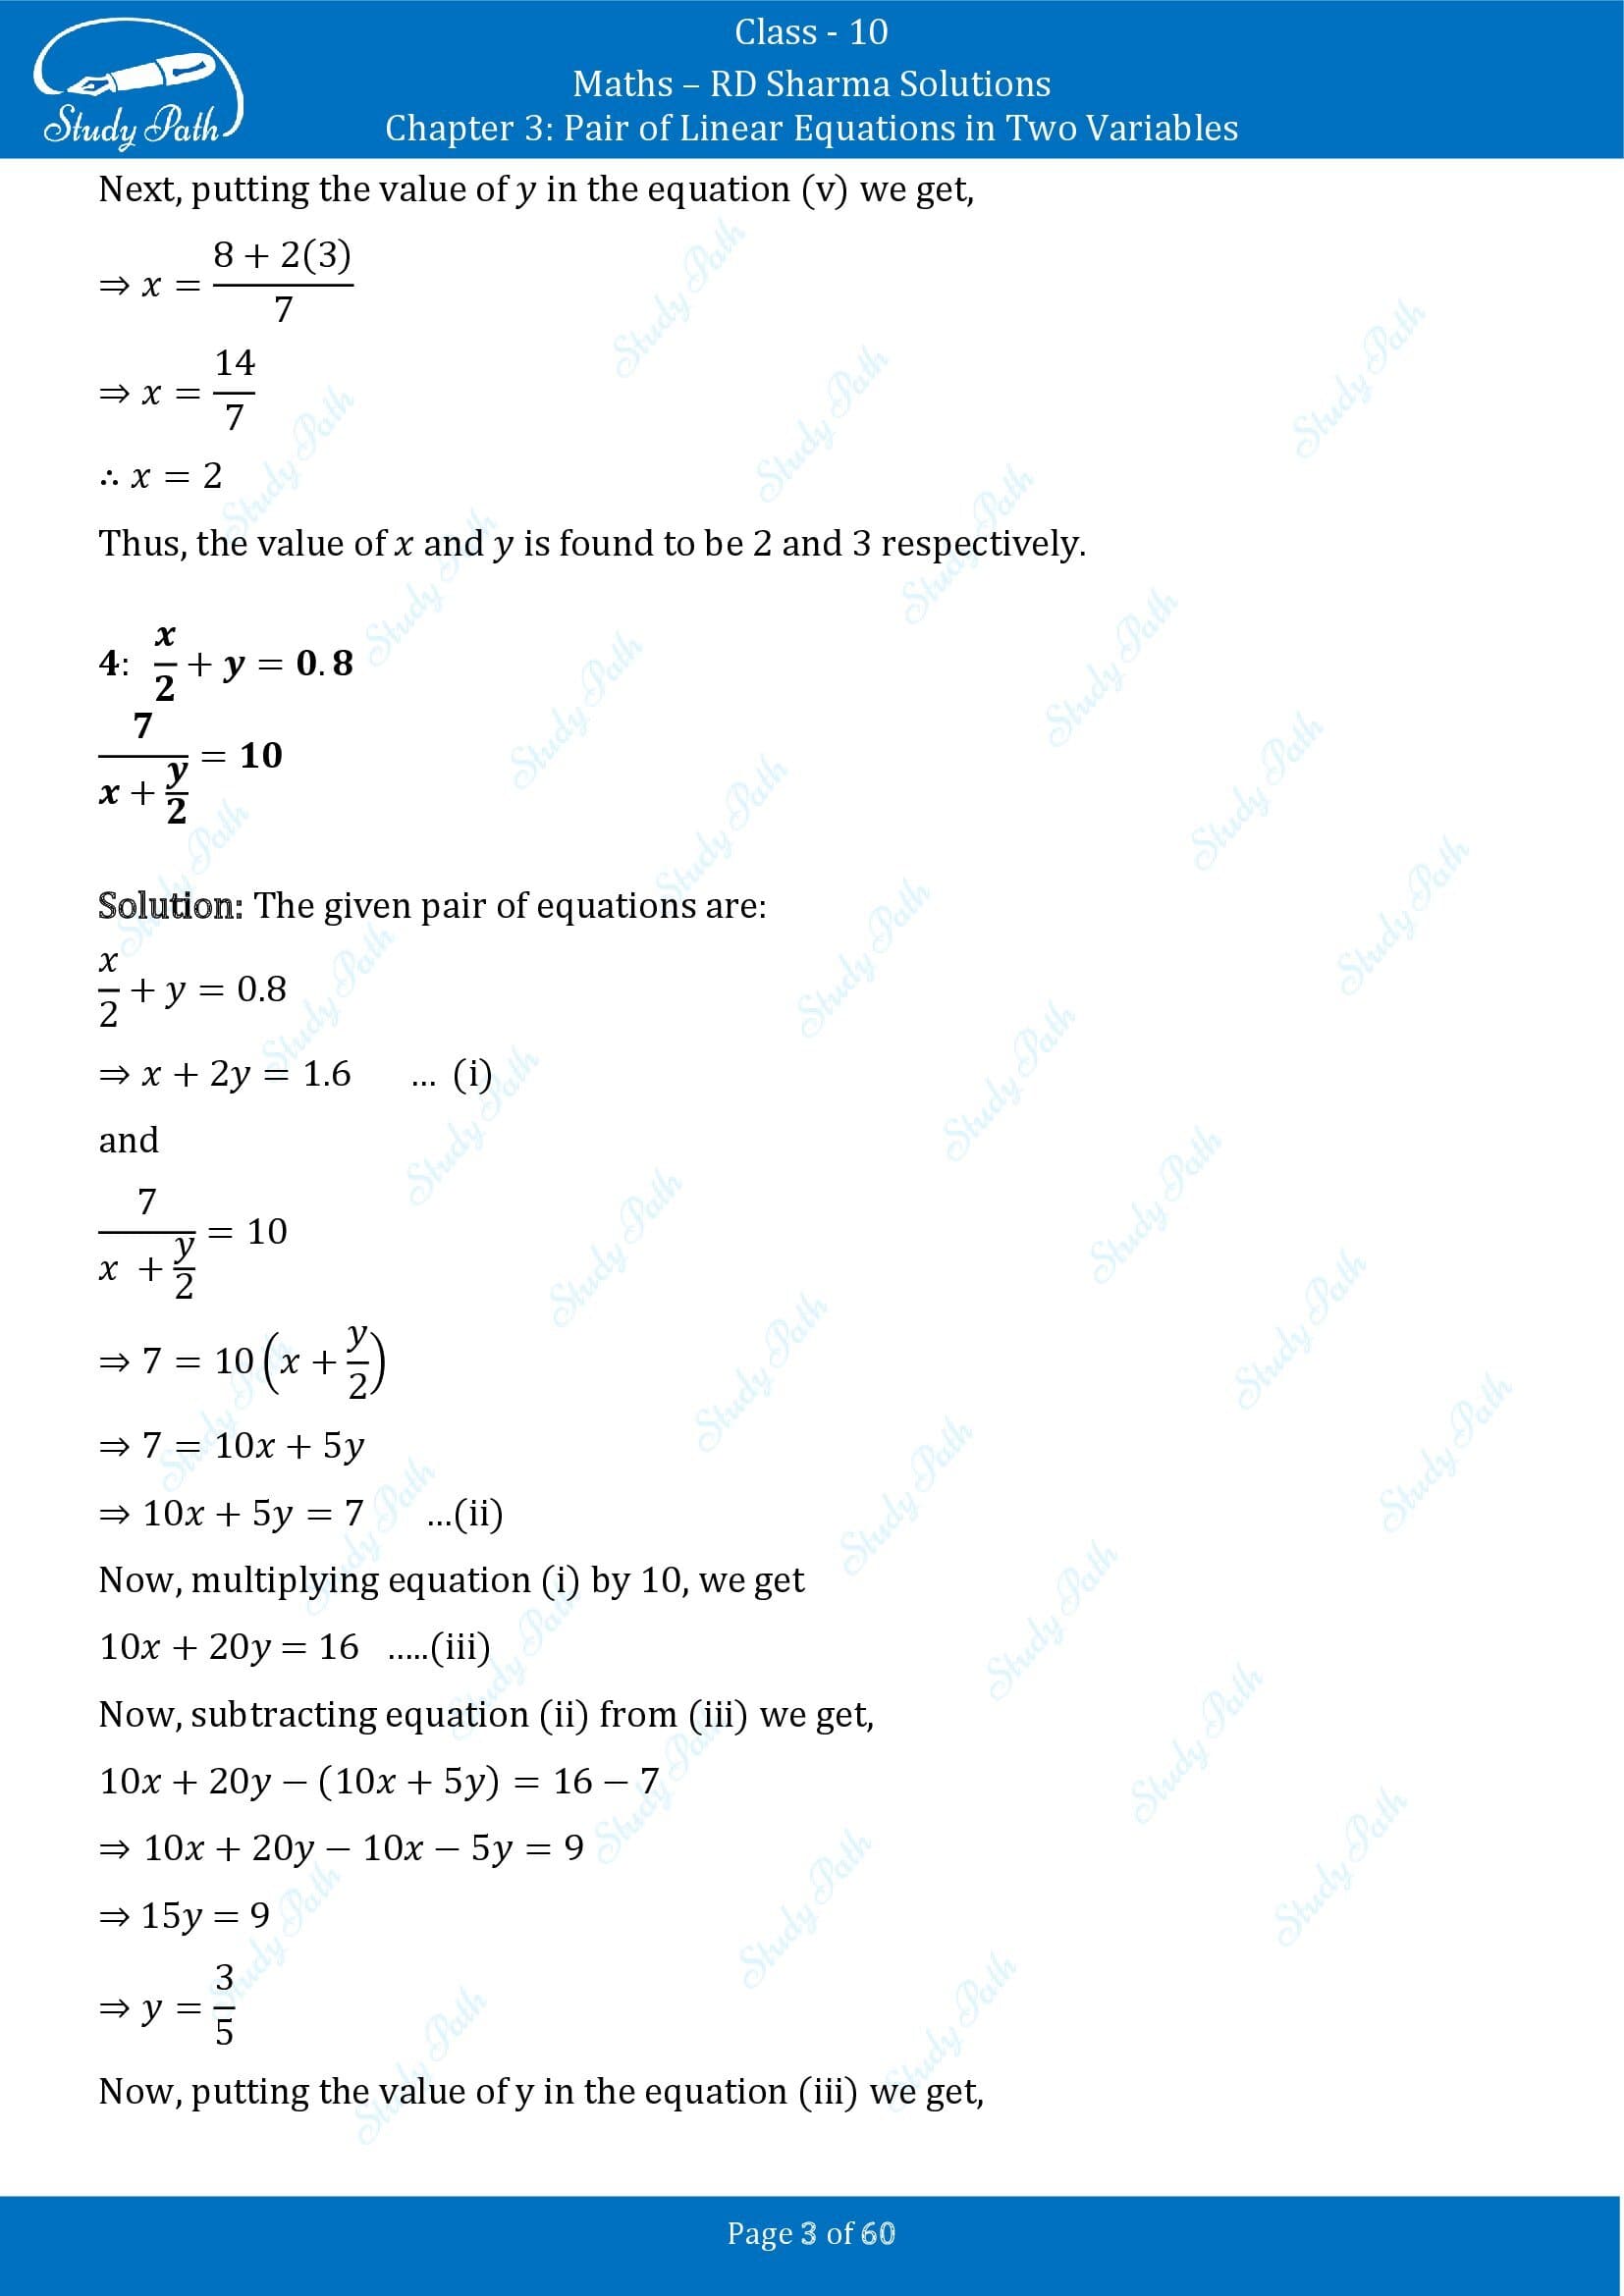 RD Sharma Solutions Class 10 Chapter 3 Pair of Linear Equations in Two Variables Exercise 3.3 00003